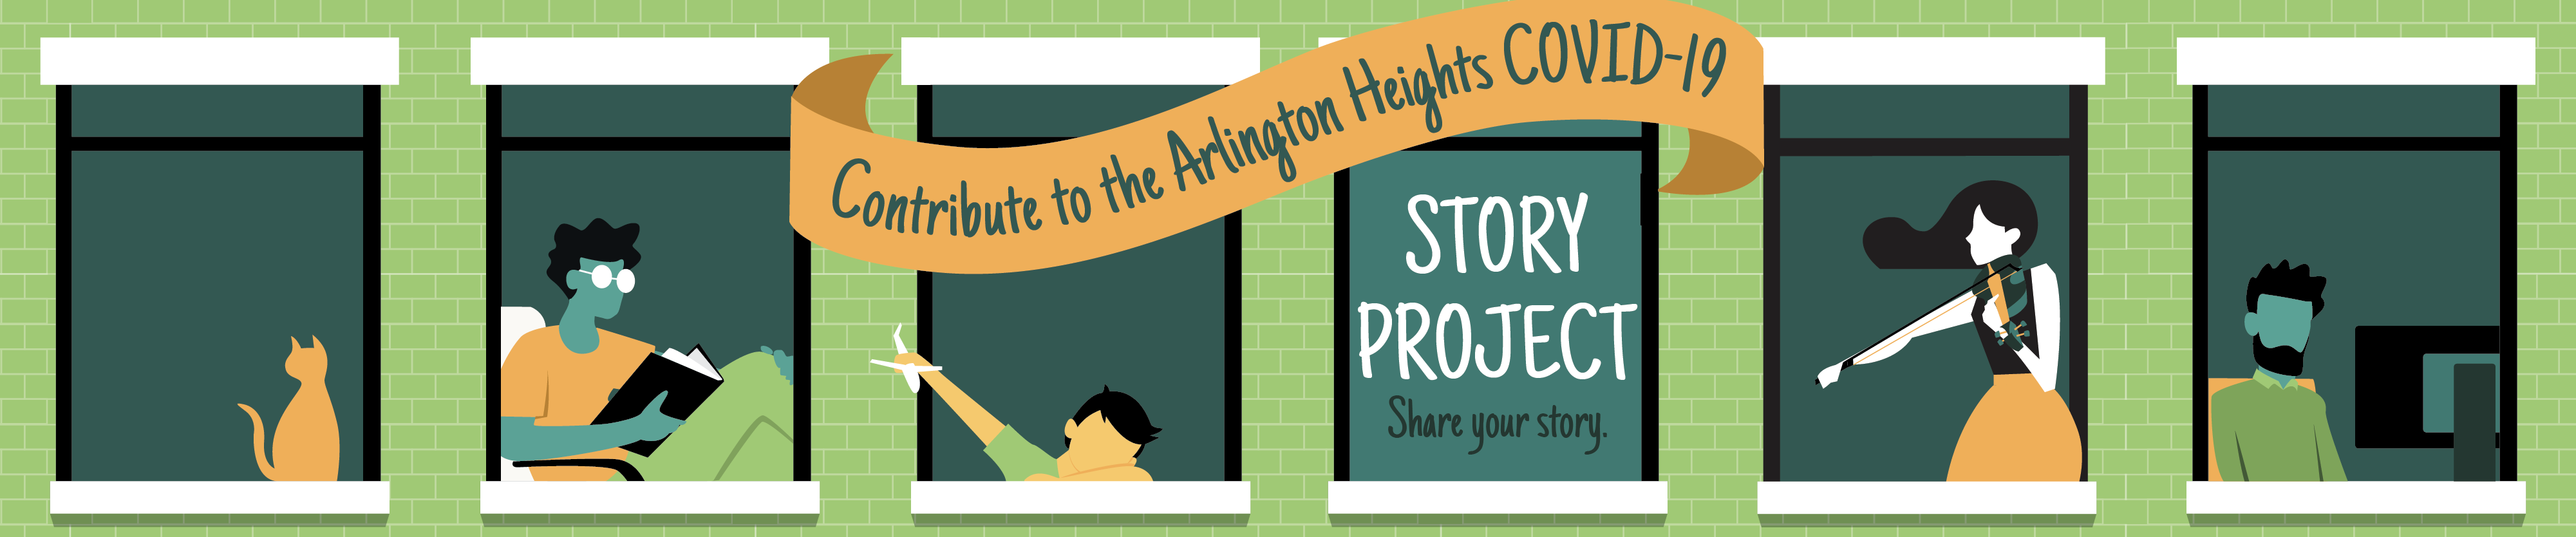 Arlington Heights COVID-19 Story Project